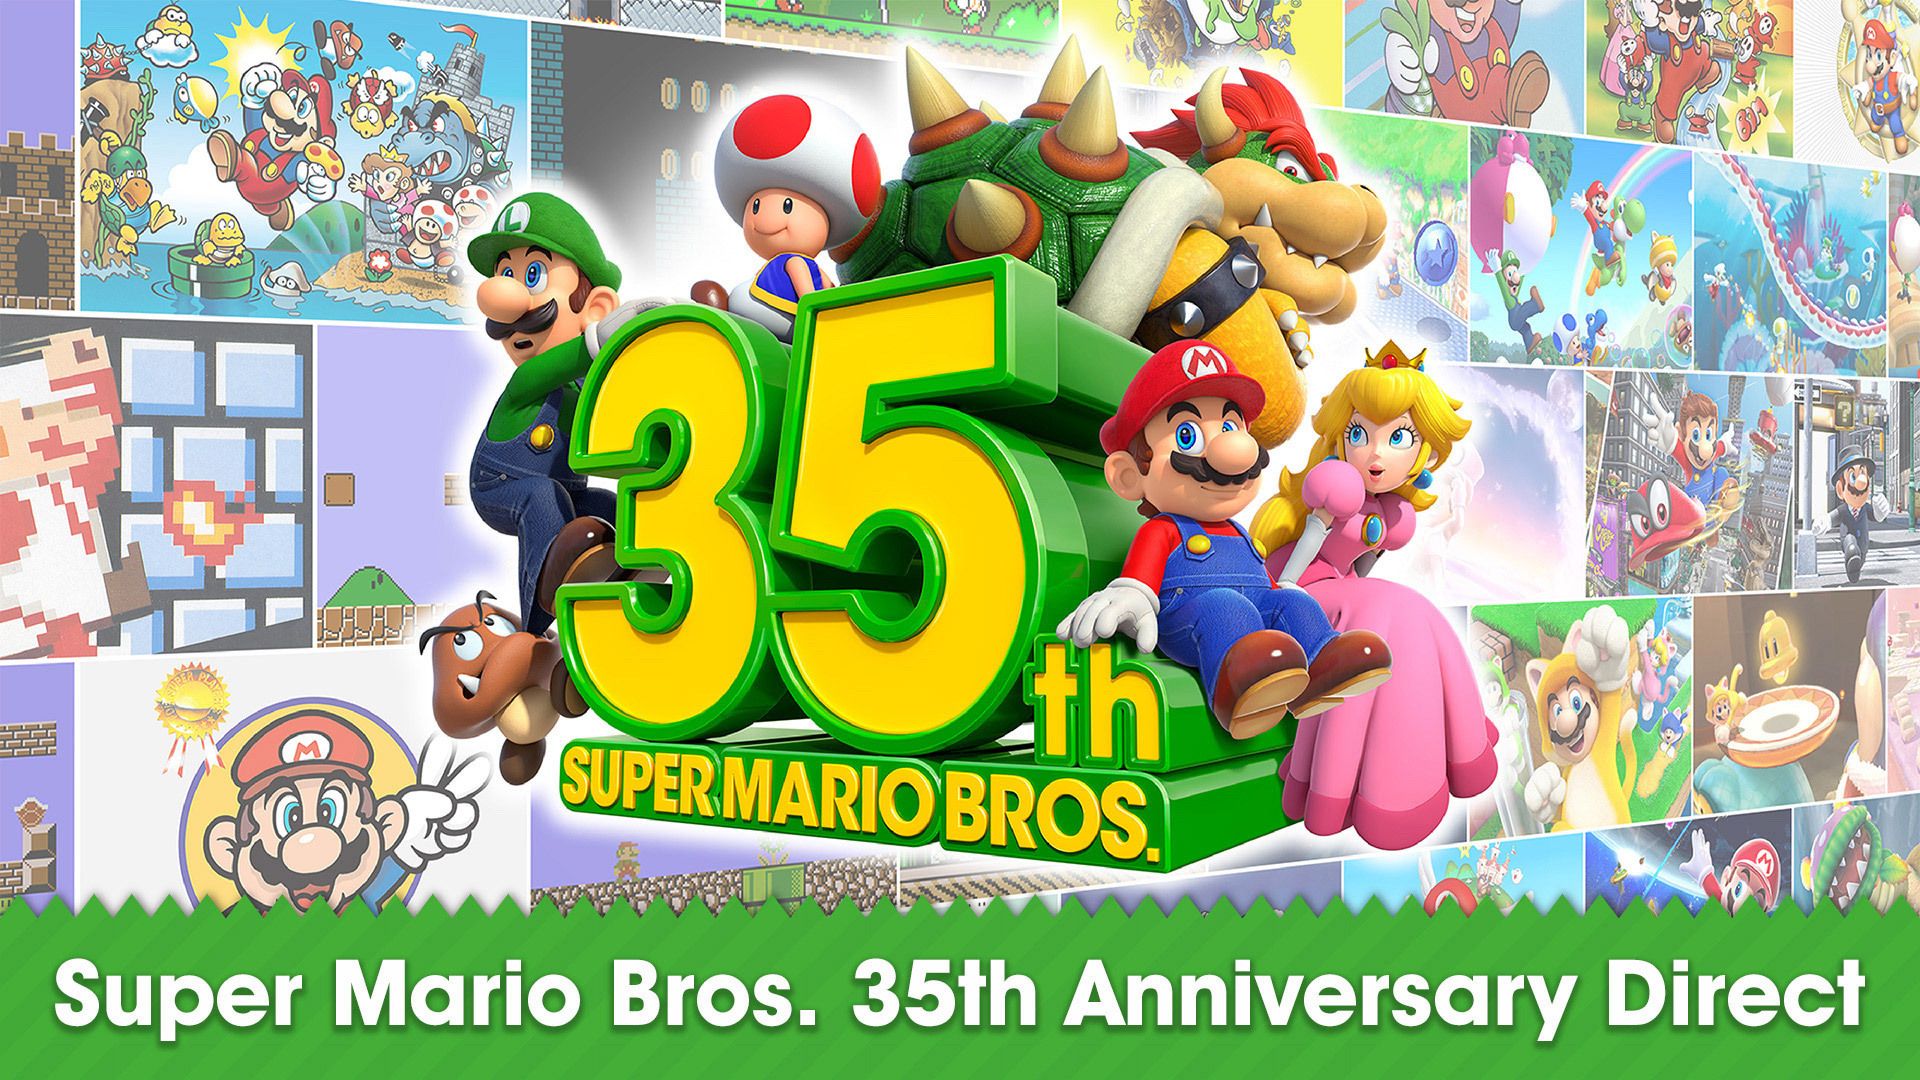 Nintendo Marks The 35th Anniversary Of Super Mario Bros. With Games, Products And In Game Events